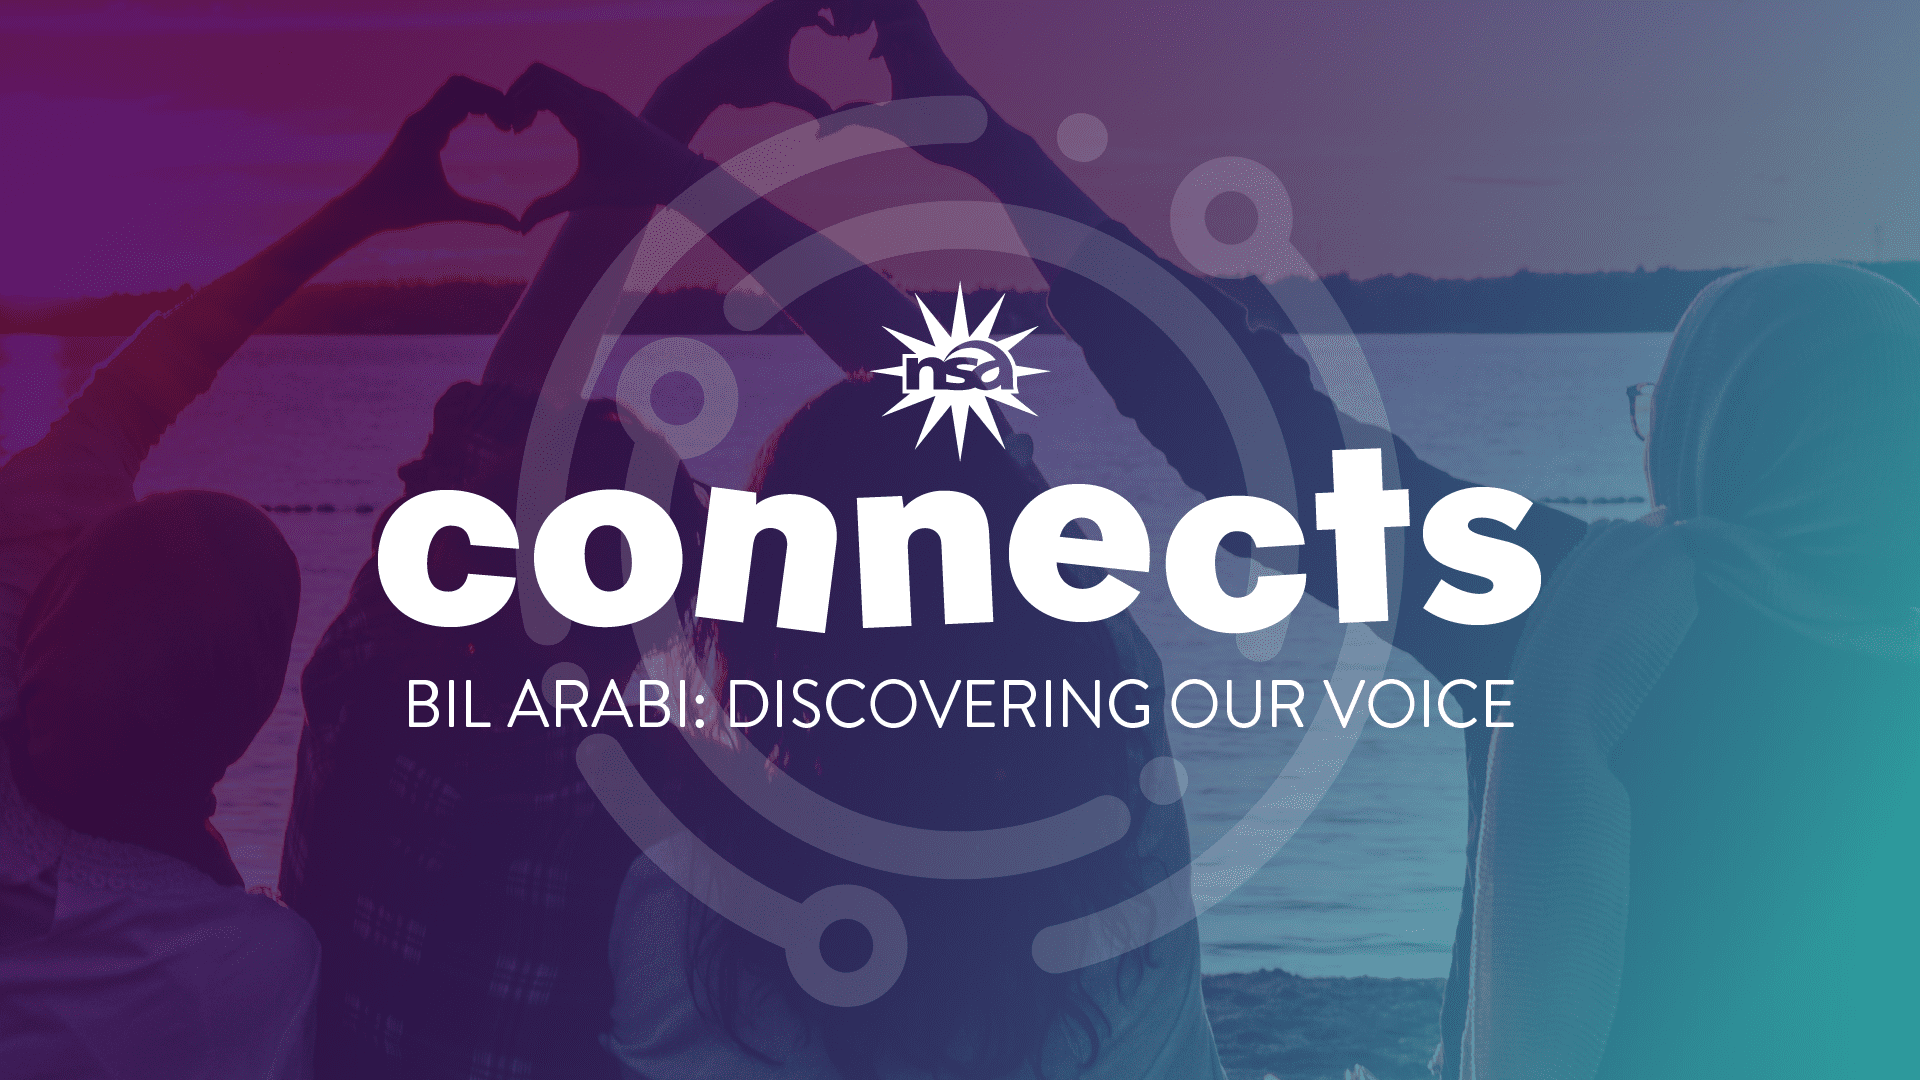 Silhouettes of four individuals making heart shapes with their hands against a sunset over water. logo and text "nba connects bil arabi: discovering our voice" overlaid.